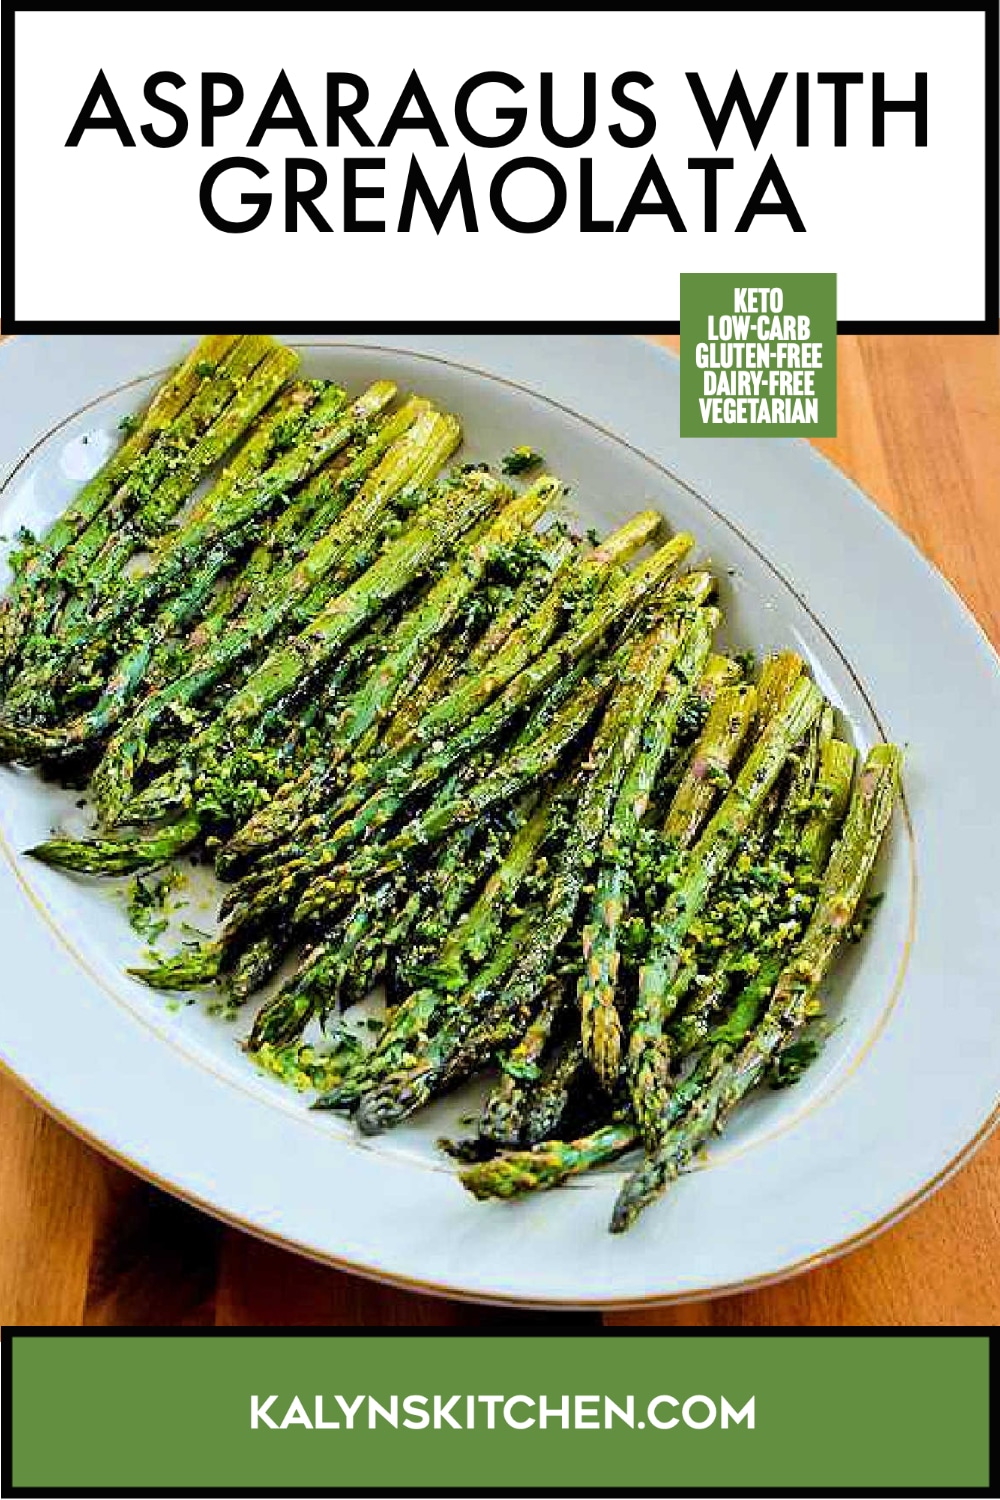 Pinterest image of Asparagus with Gremolata